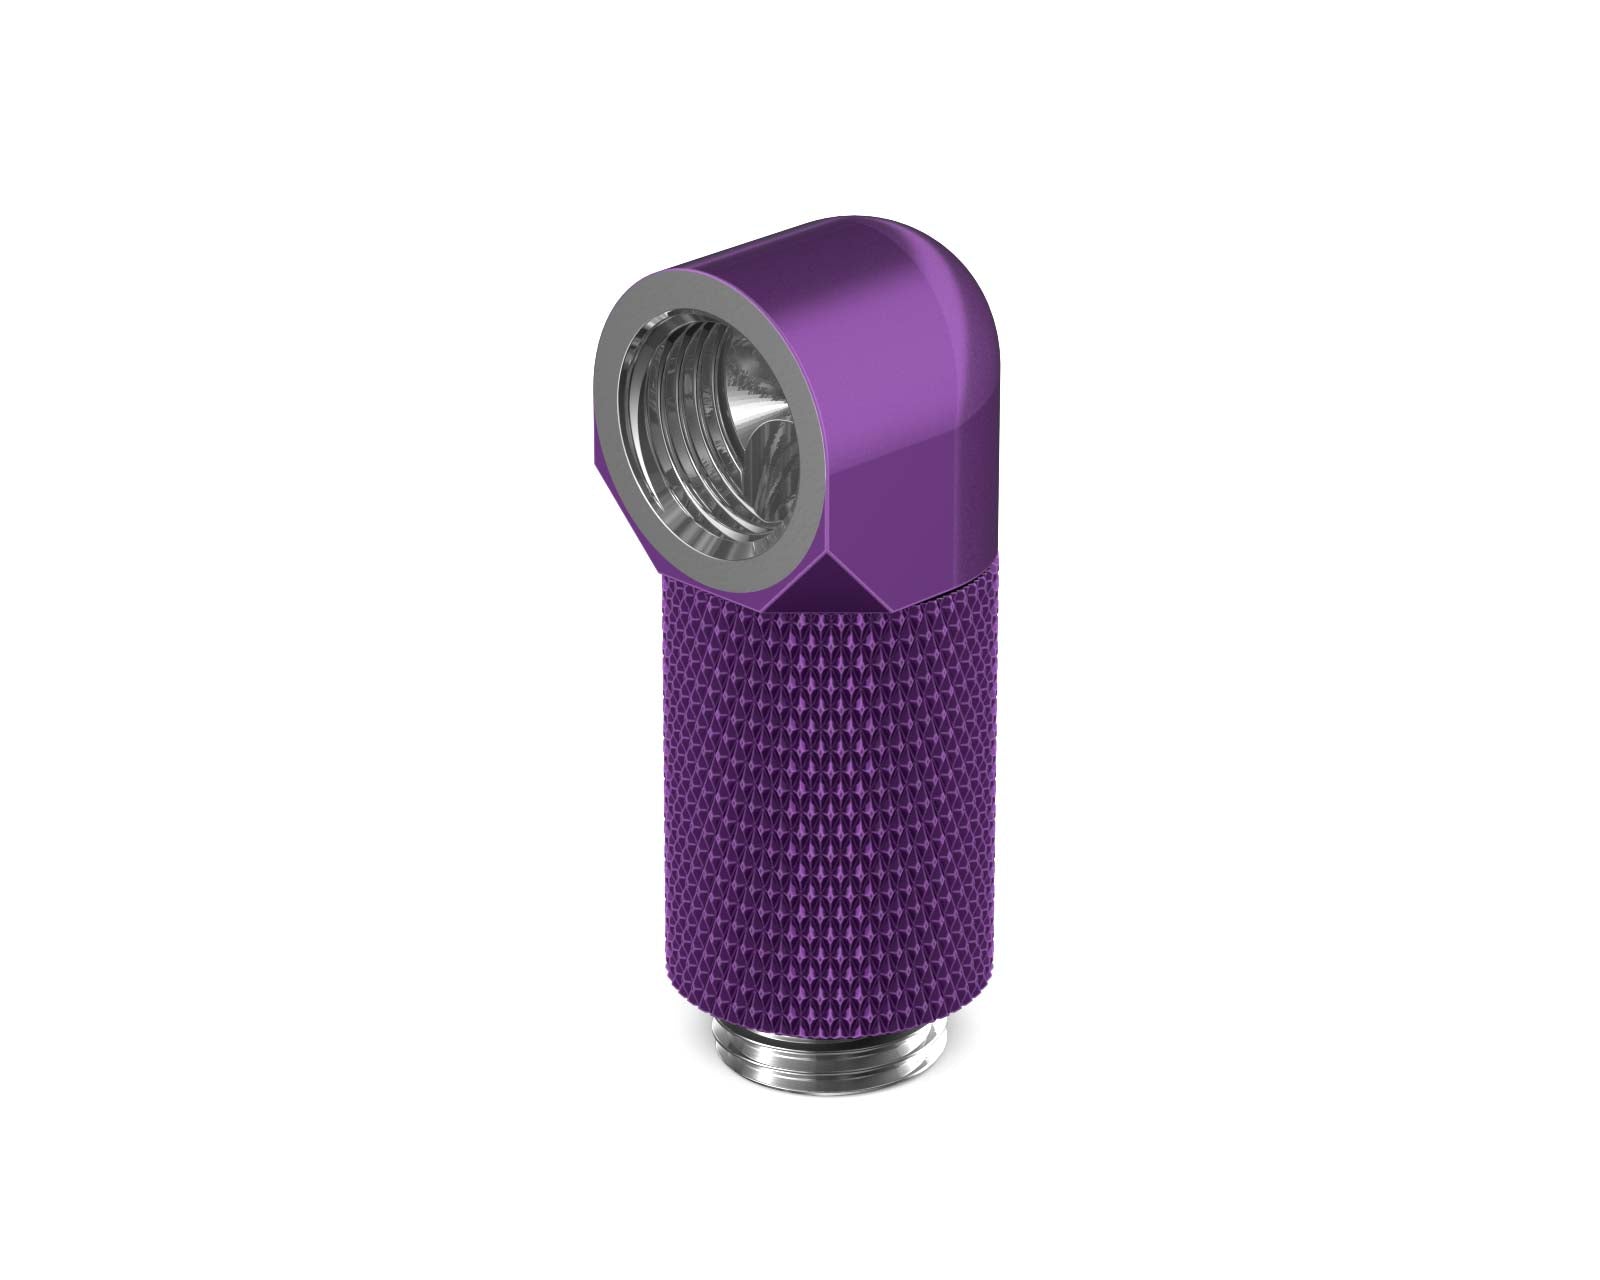 PrimoChill Male to Female G 1/4in. 90 Degree SX Rotary 25mm Extension Elbow Fitting - PrimoChill - KEEPING IT COOL Candy Purple